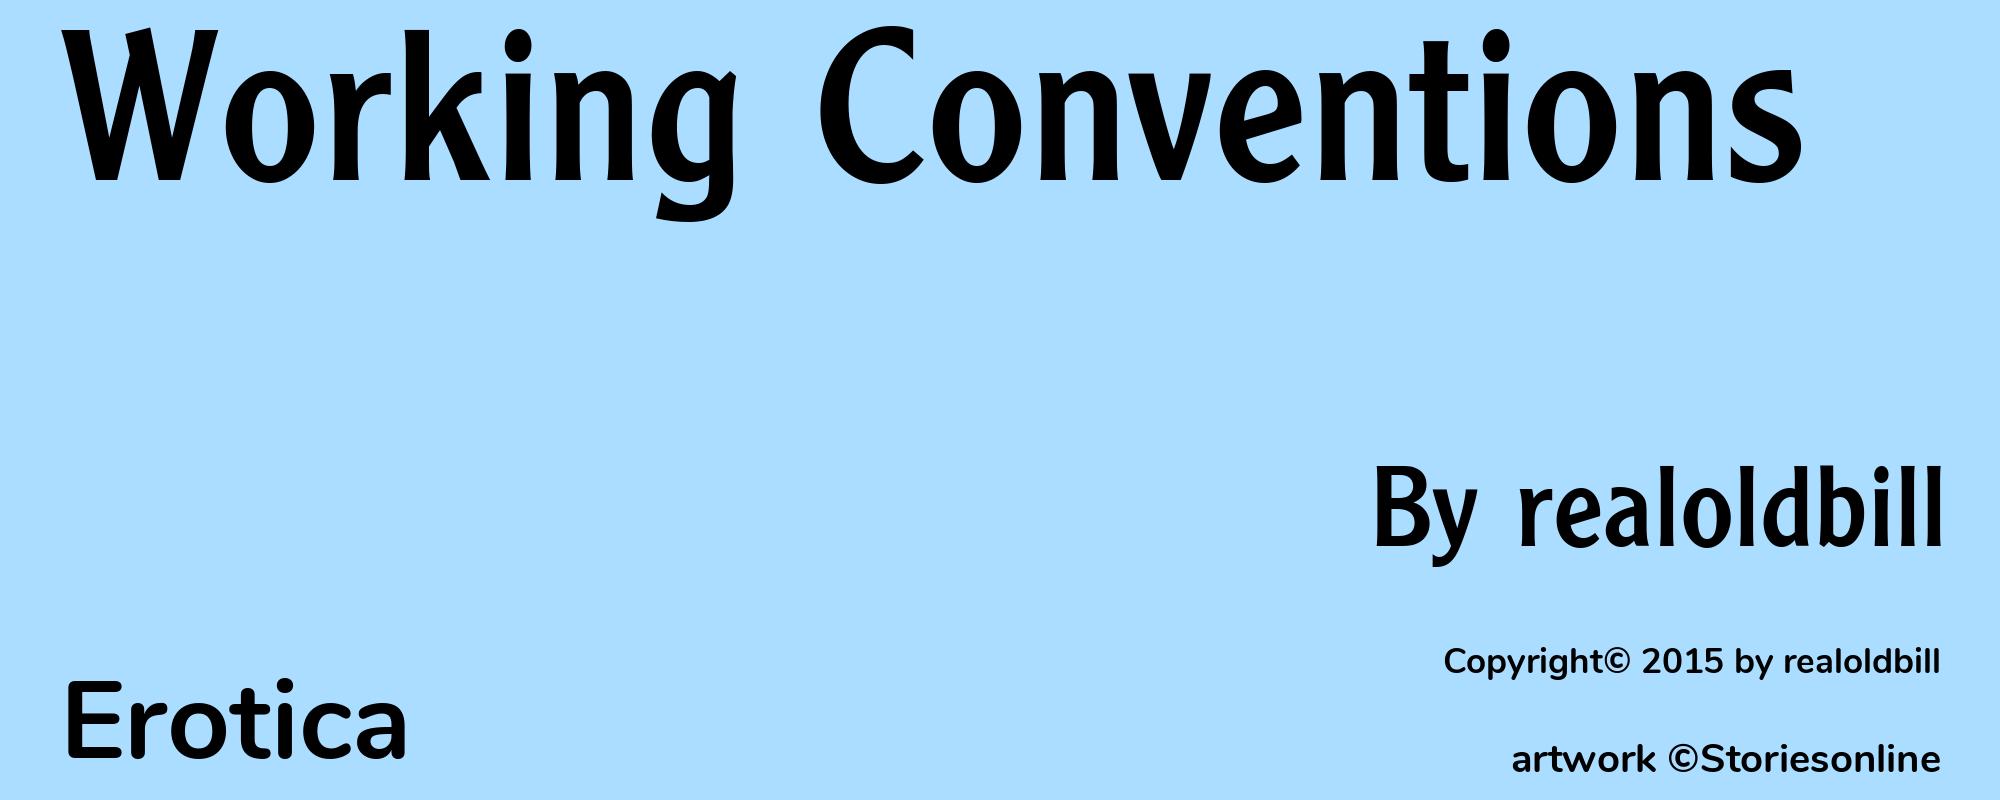 Working Conventions - Cover